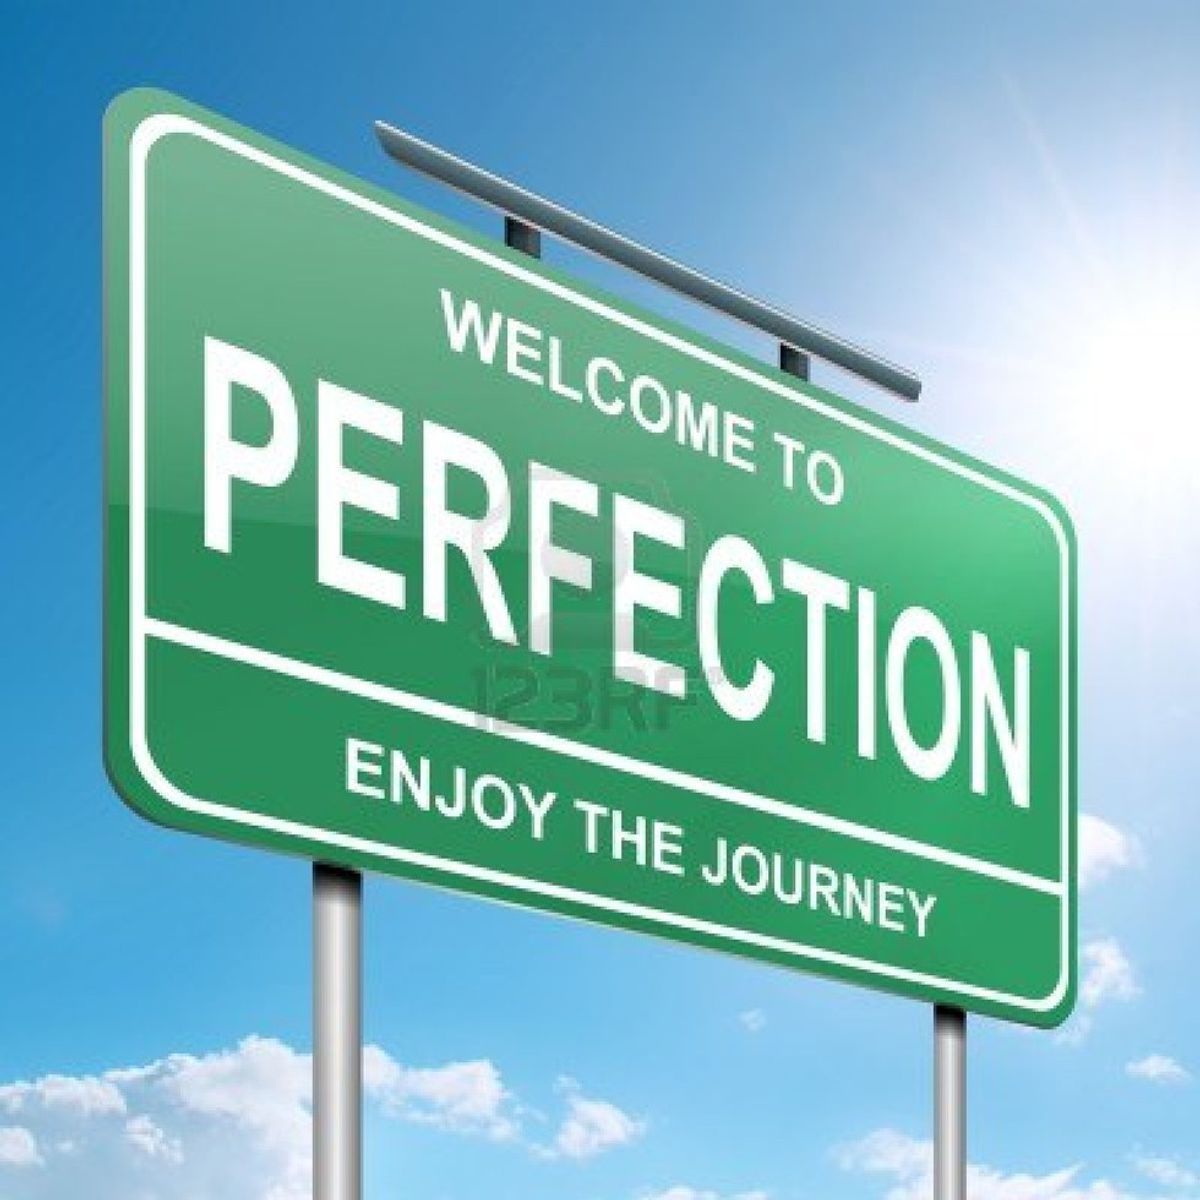 Perfection: An Imperfect Word